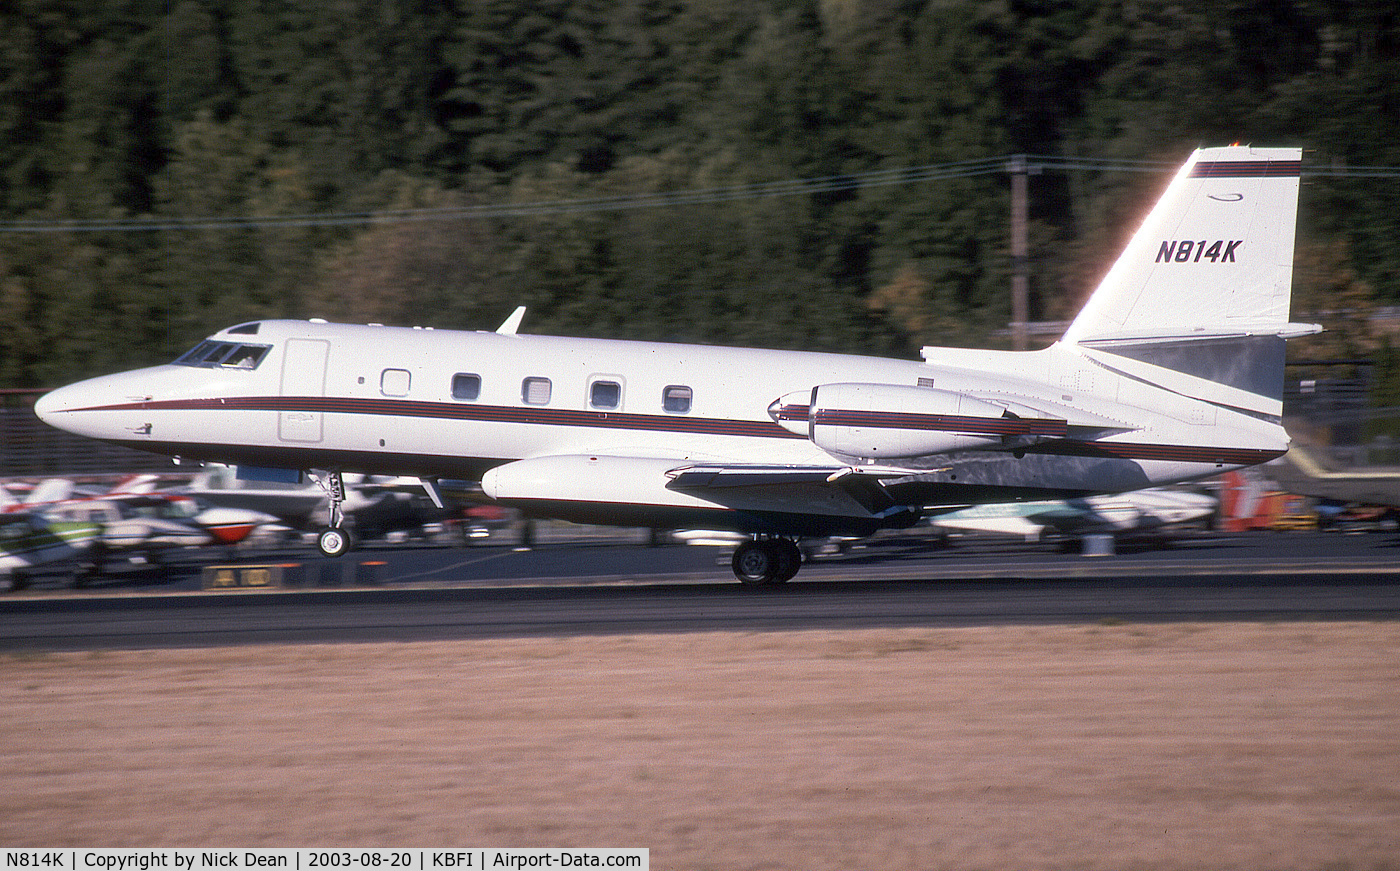 N814K, 1977 Lockheed L-1329-25 Jetstar II C/N Aircraft was picked clean of usable parts and then cut up for scrap  February/March 2015, KBFI